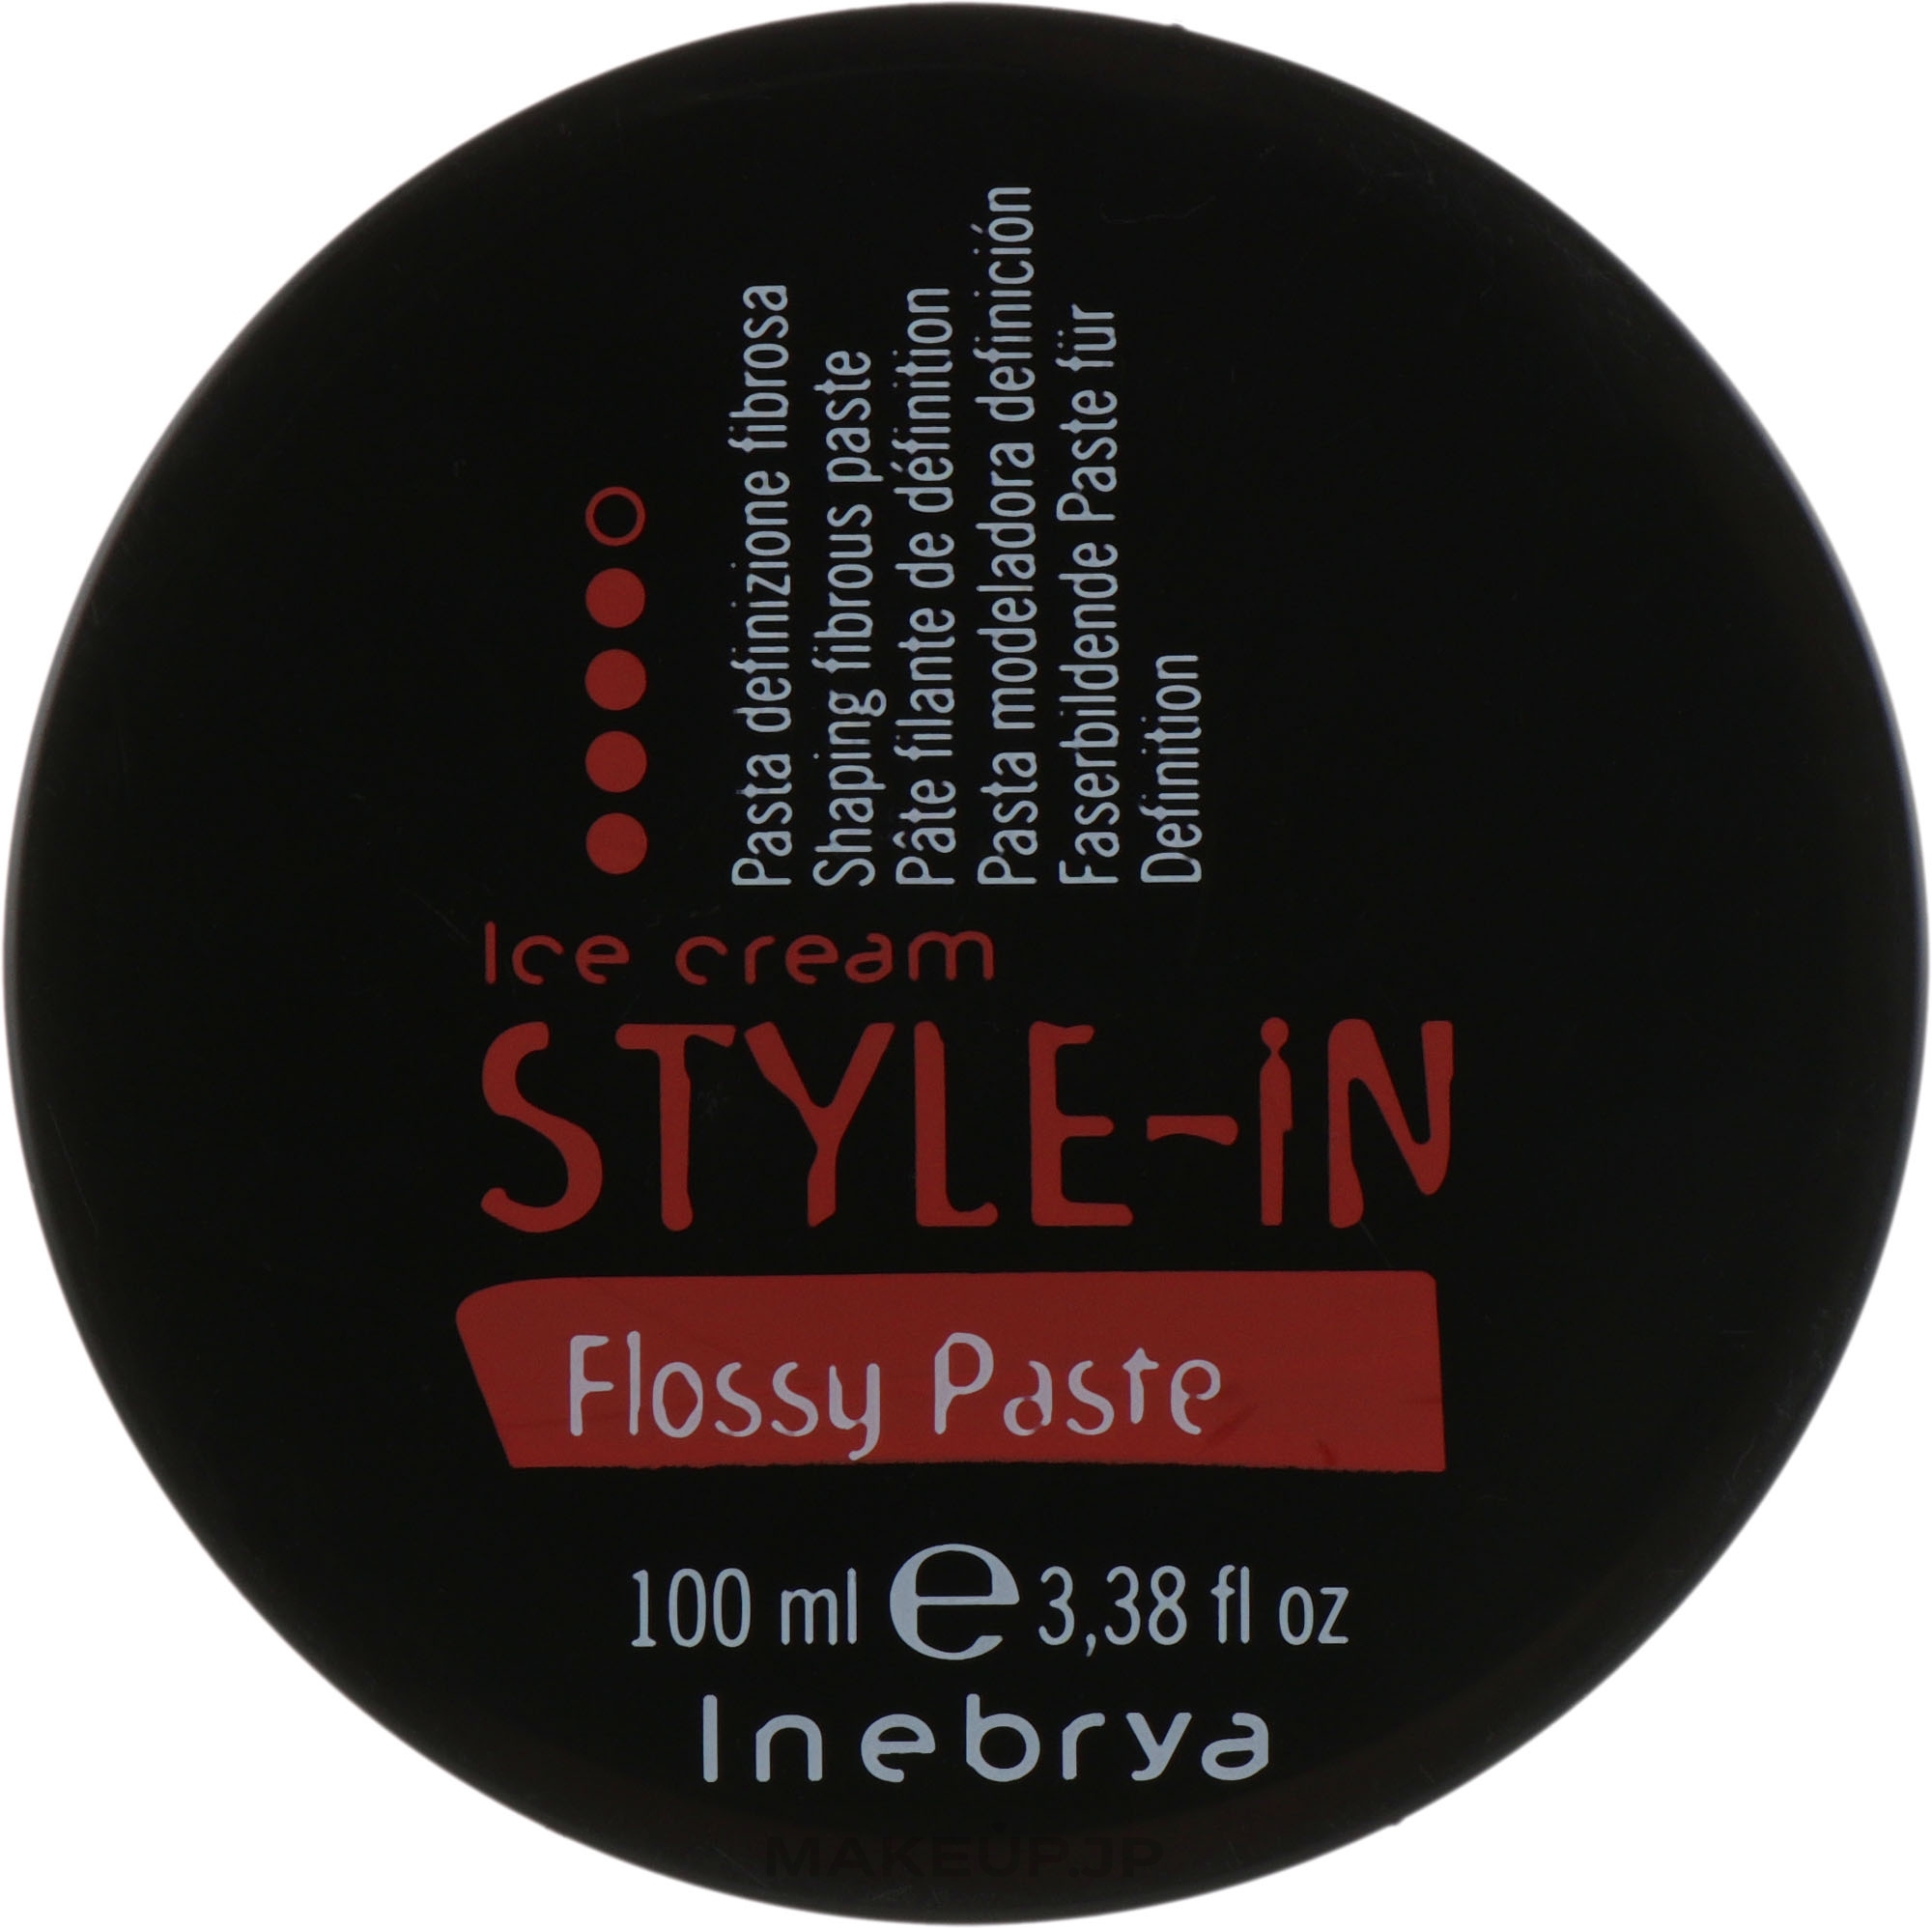 Styling Fibrous Paste - Inebrya Style-In Flossy Paste — photo 100 ml